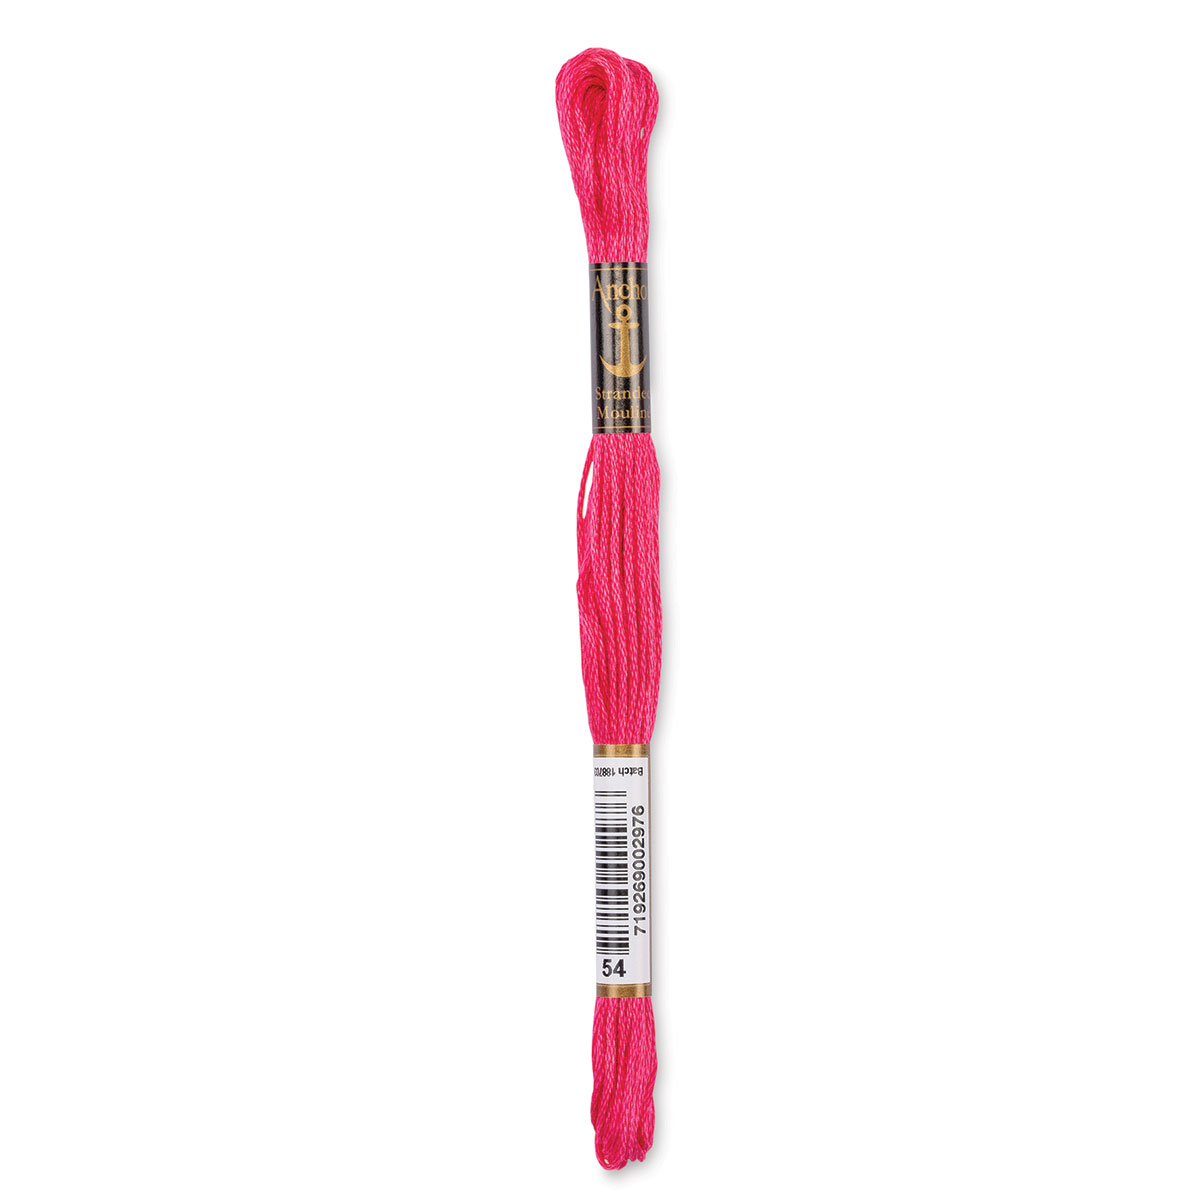 Anchor Embroidery Floss 46 Crimson Red - 719269002914